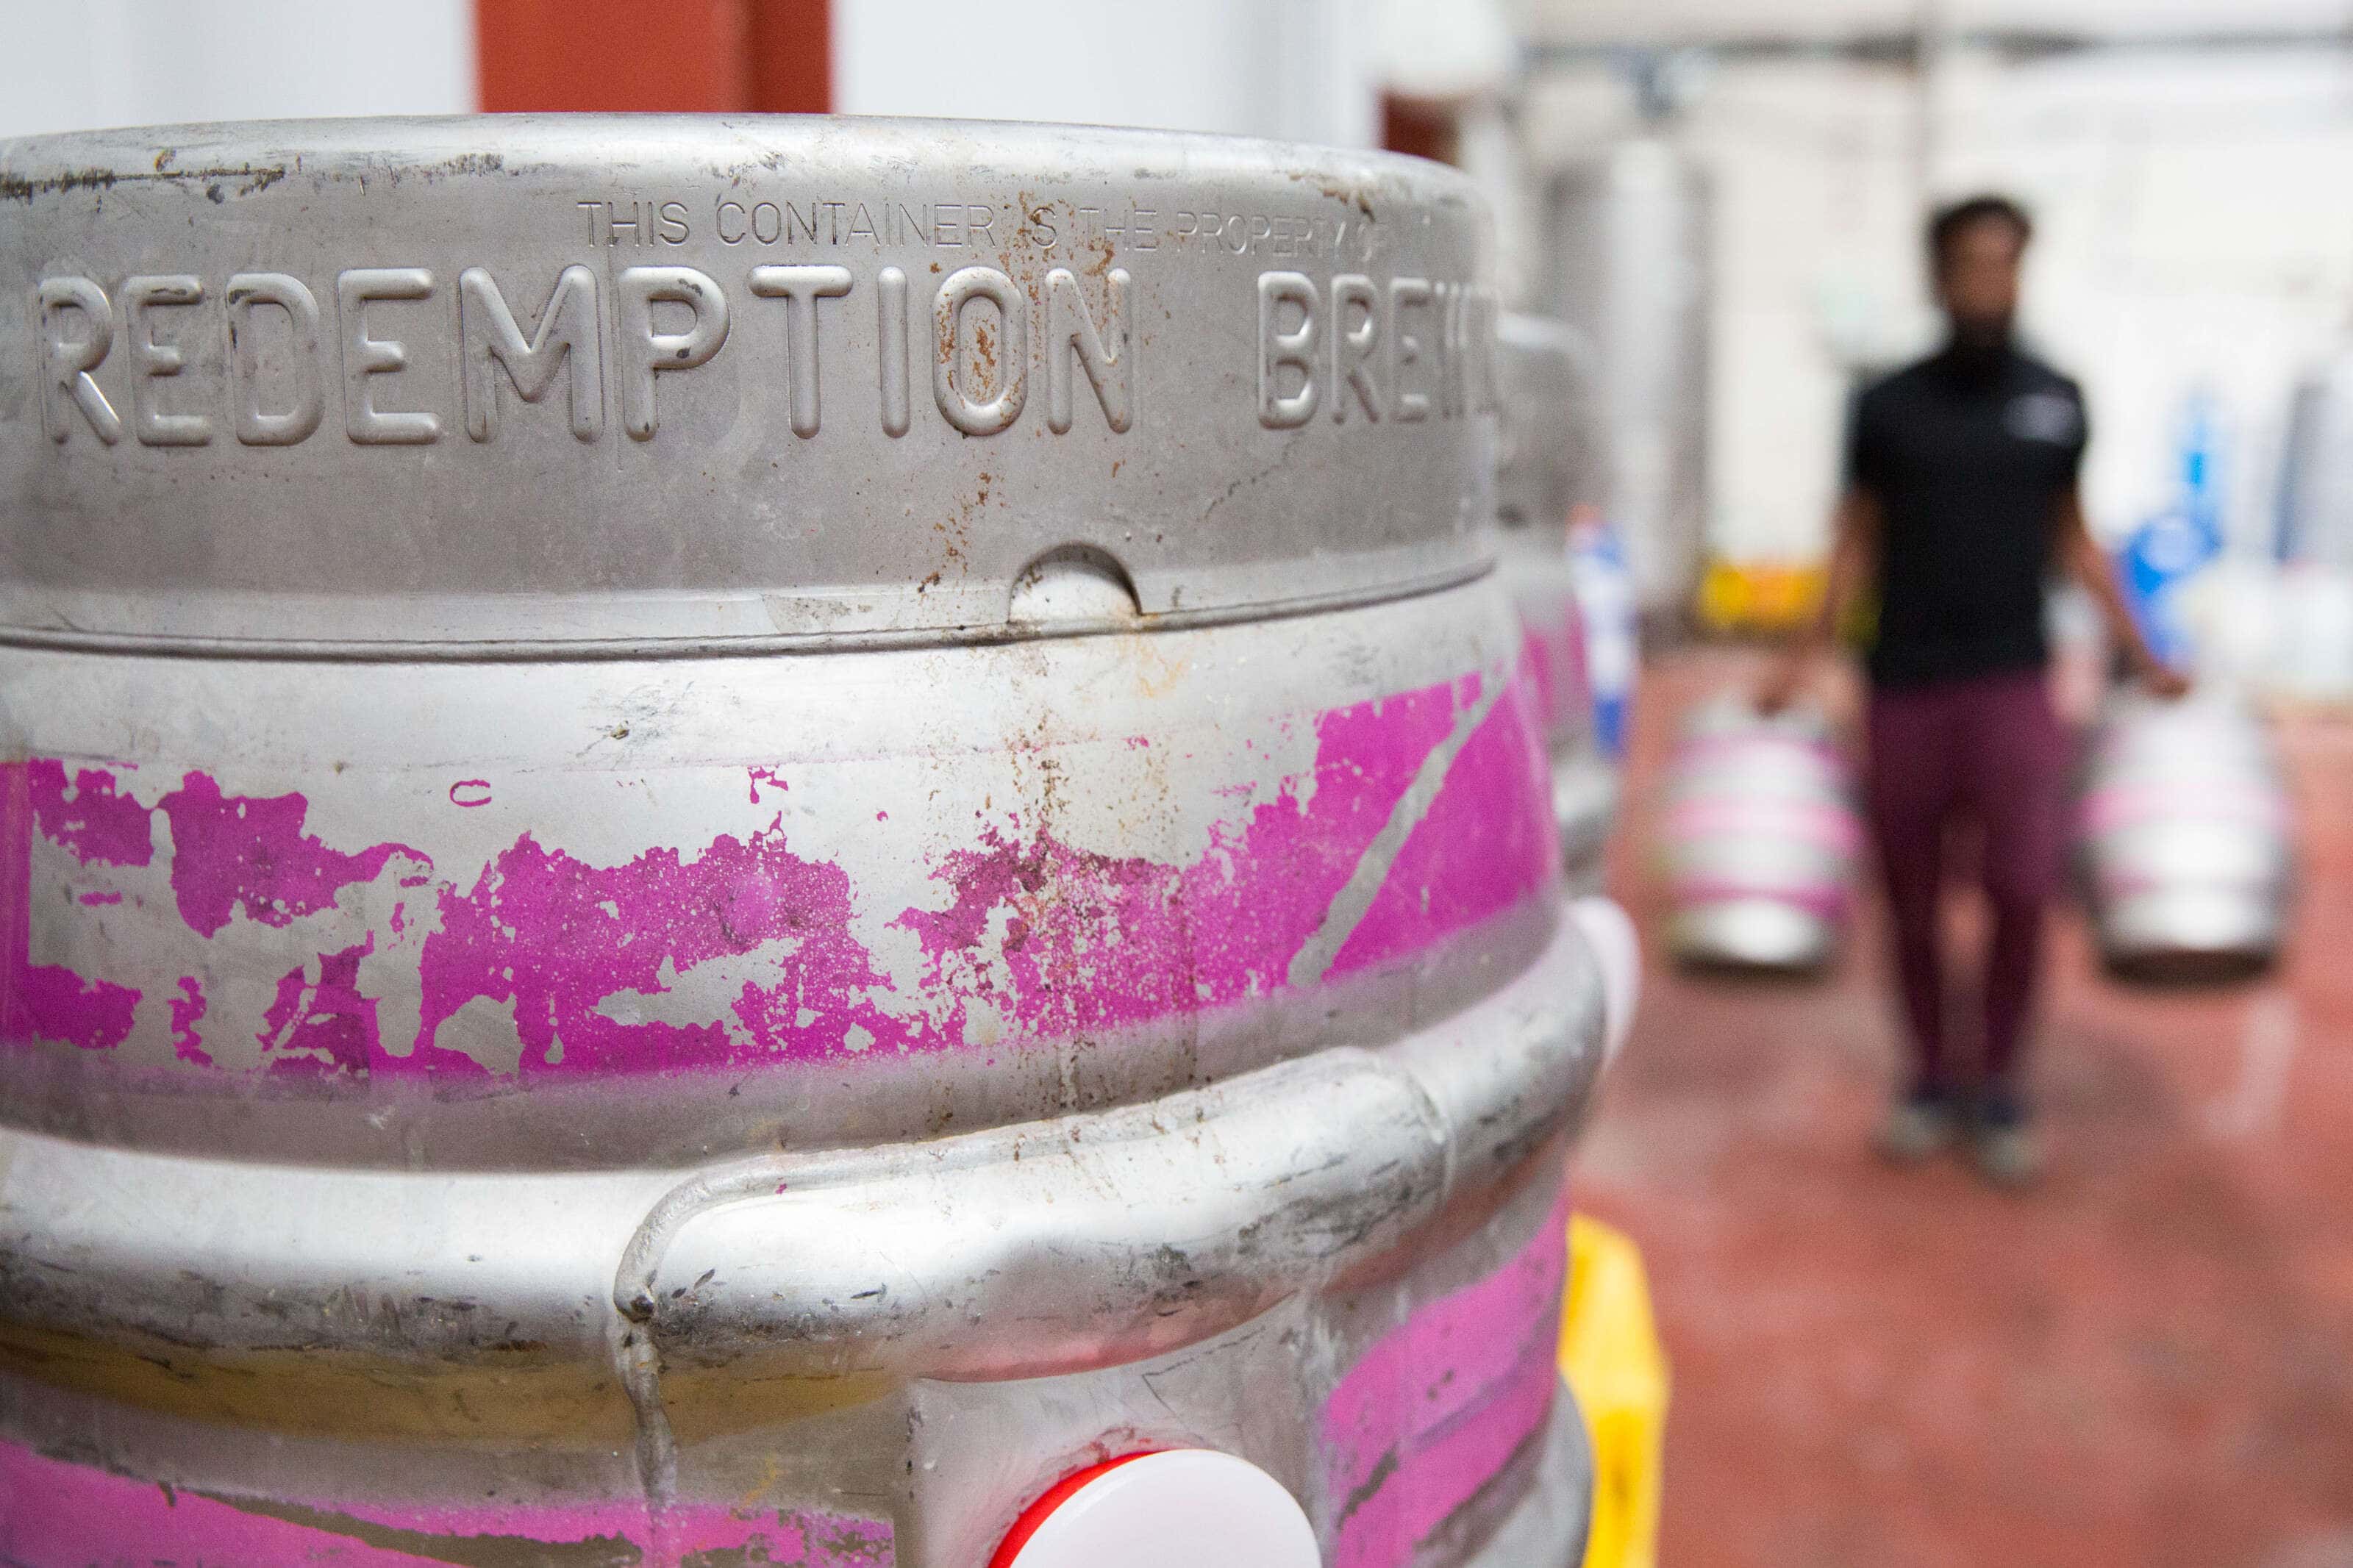 Redemption Brewery cask with a person carryinng two casks in the backgroun